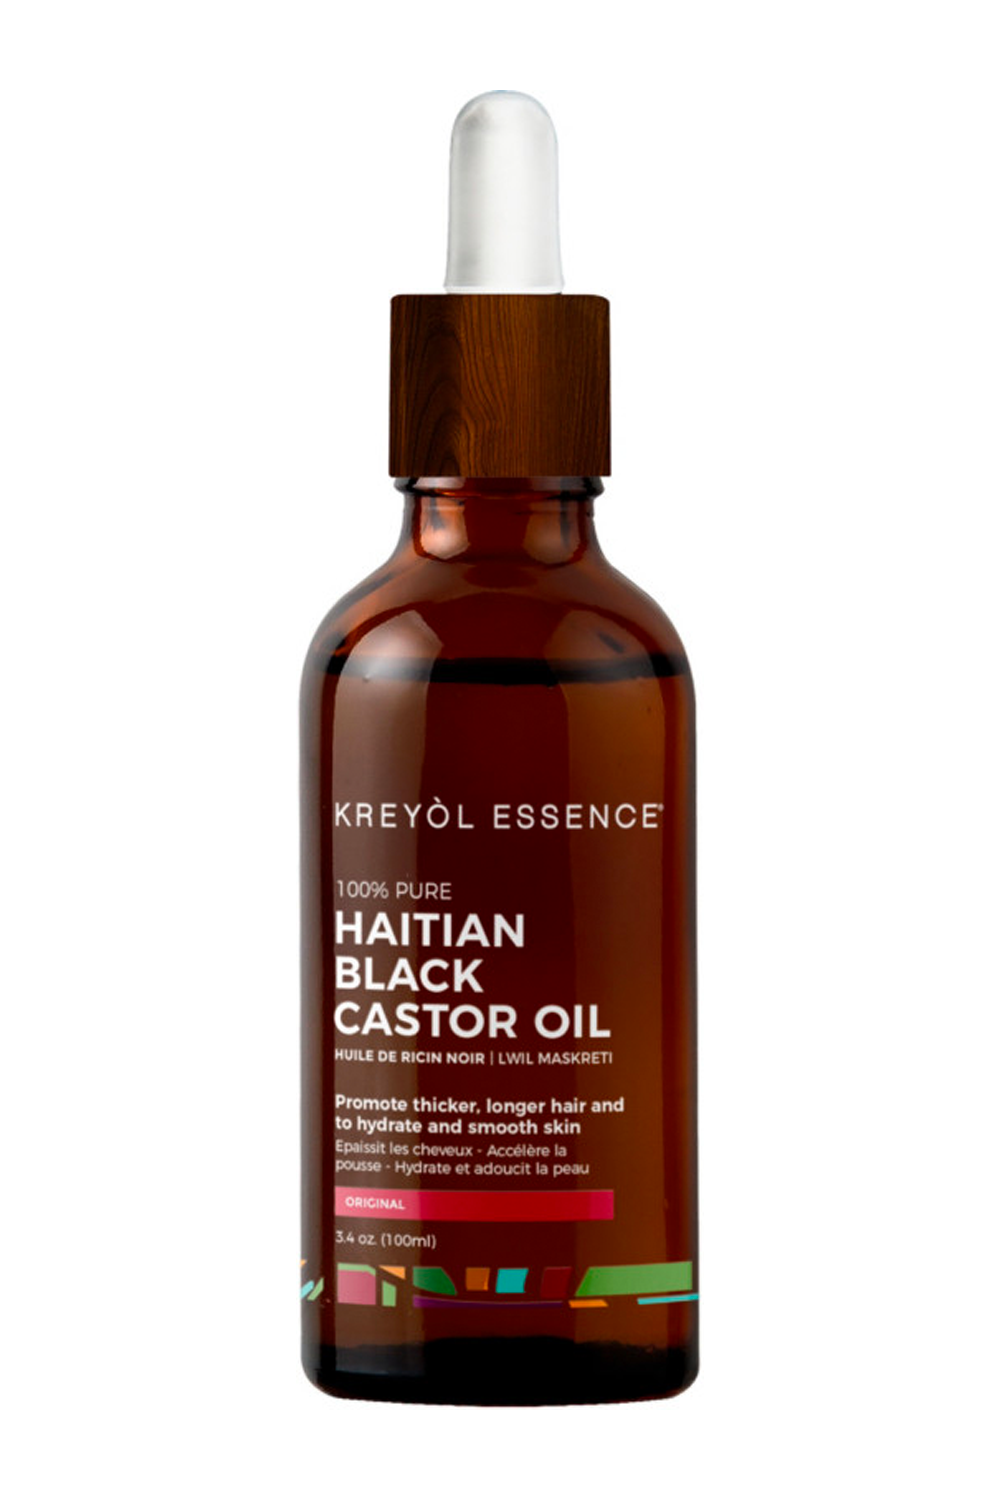 How To Use Castor Oil For Hair Growth 2020 According To Experts